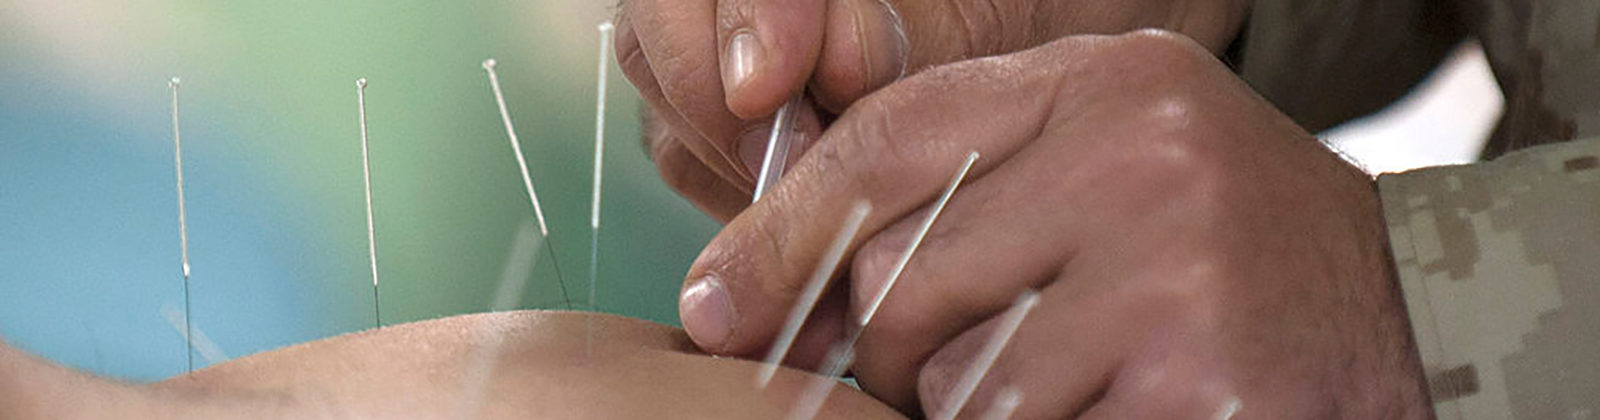 Acupuncture treatment with needles inserted into a patient's back.